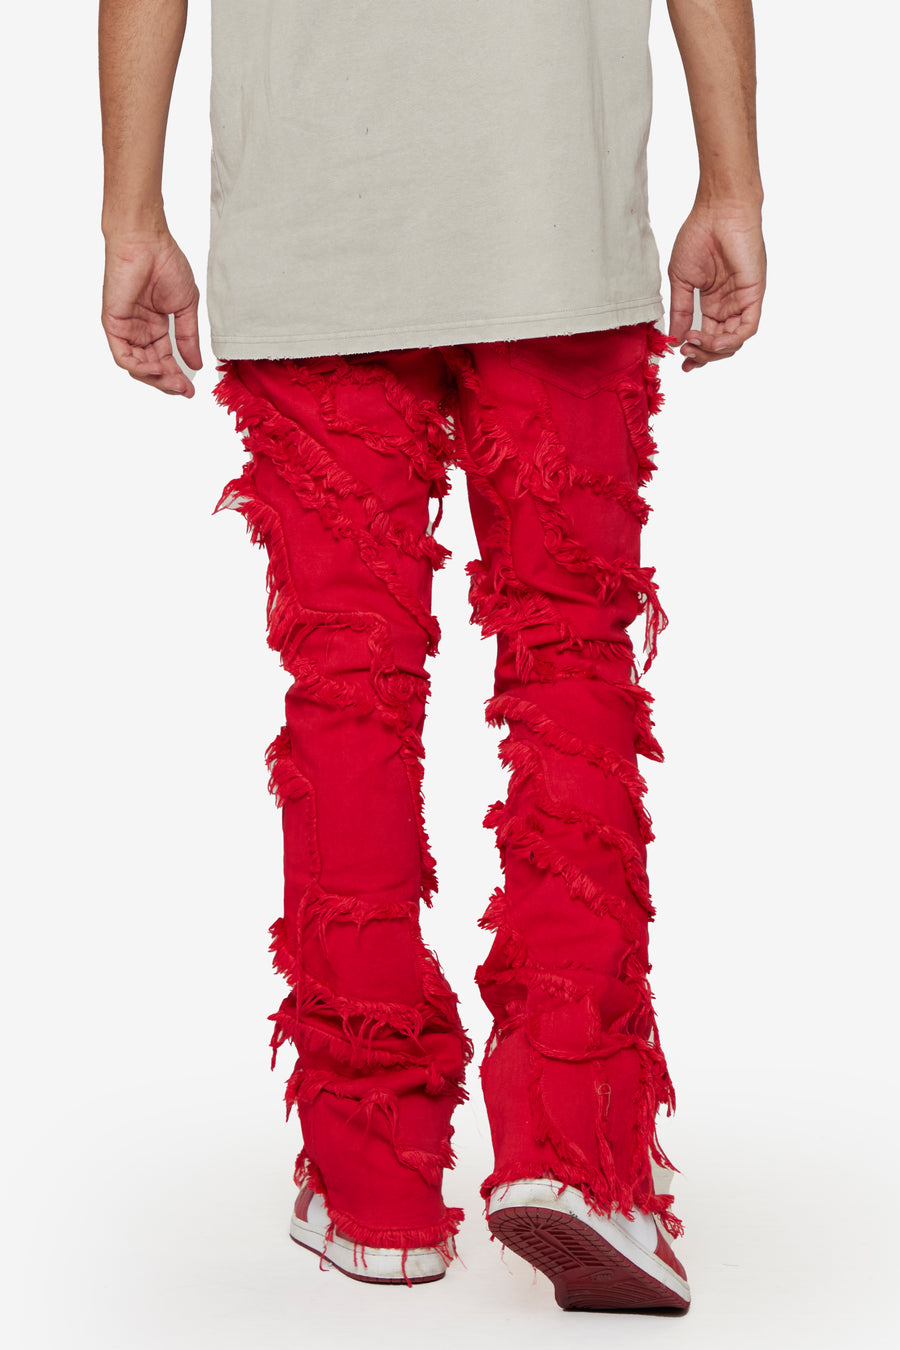 ‚ÄúGRIT‚Äù RED WASHED STACKED FLARE JEAN